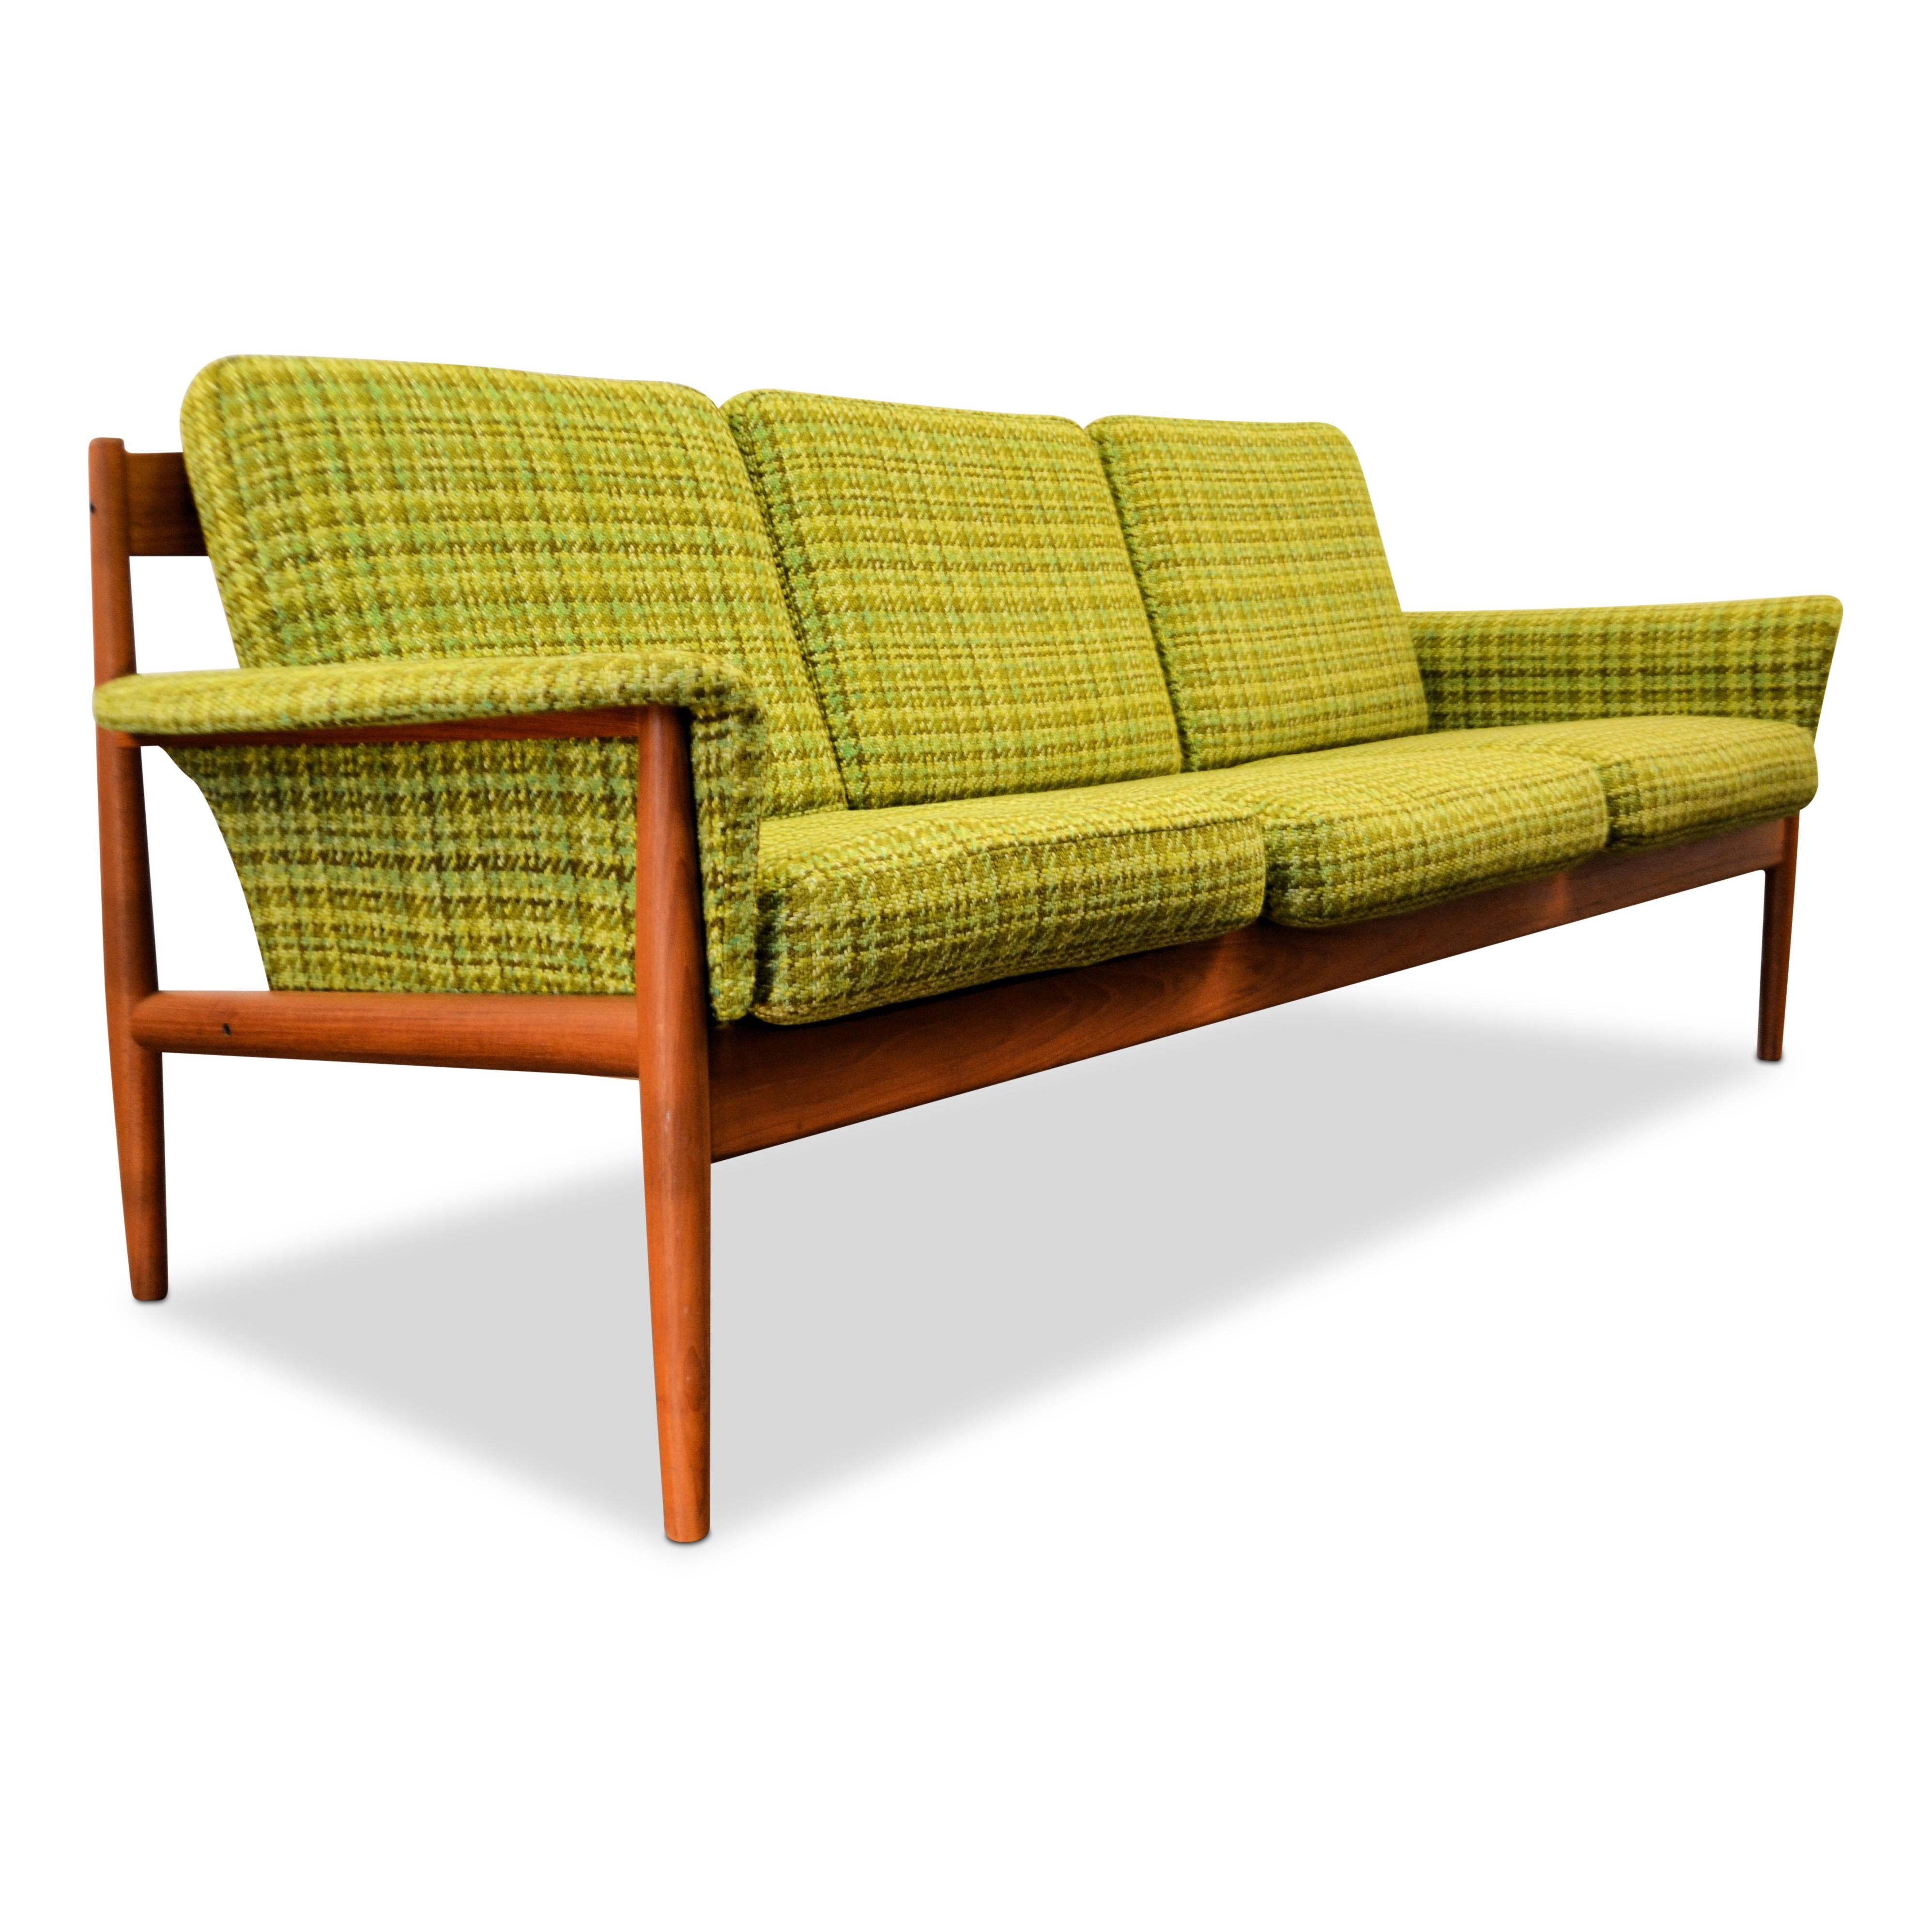 Vintage three-seat sofa in solid teak. Designed by Danish top designer Grete Jalk for France & Son. Grete Jalk was a driving force behind the global Expansion of Danish Design. Her simple but stylish organic furniture, wallpaper and fabric designs